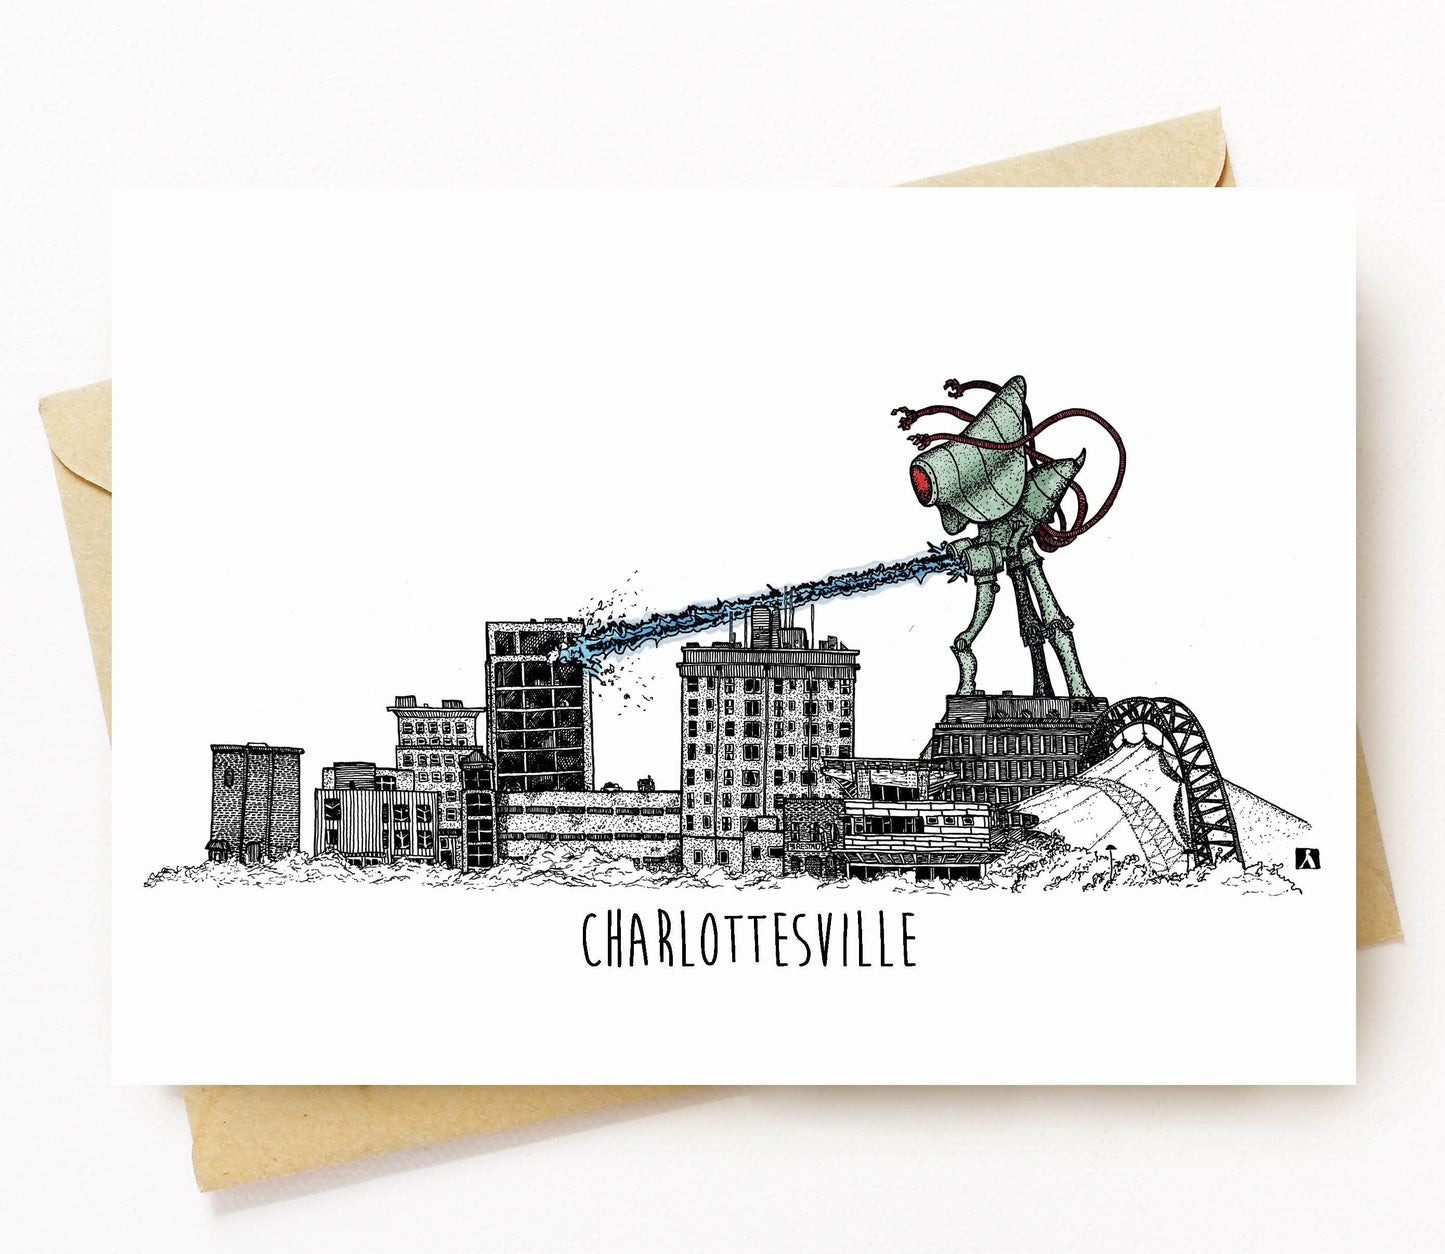 BellavanceInk: Greeting Card With A Pen & Ink Drawing Of Alien Monster In Charlottesville 5 x 7 Inches - BellavanceInk